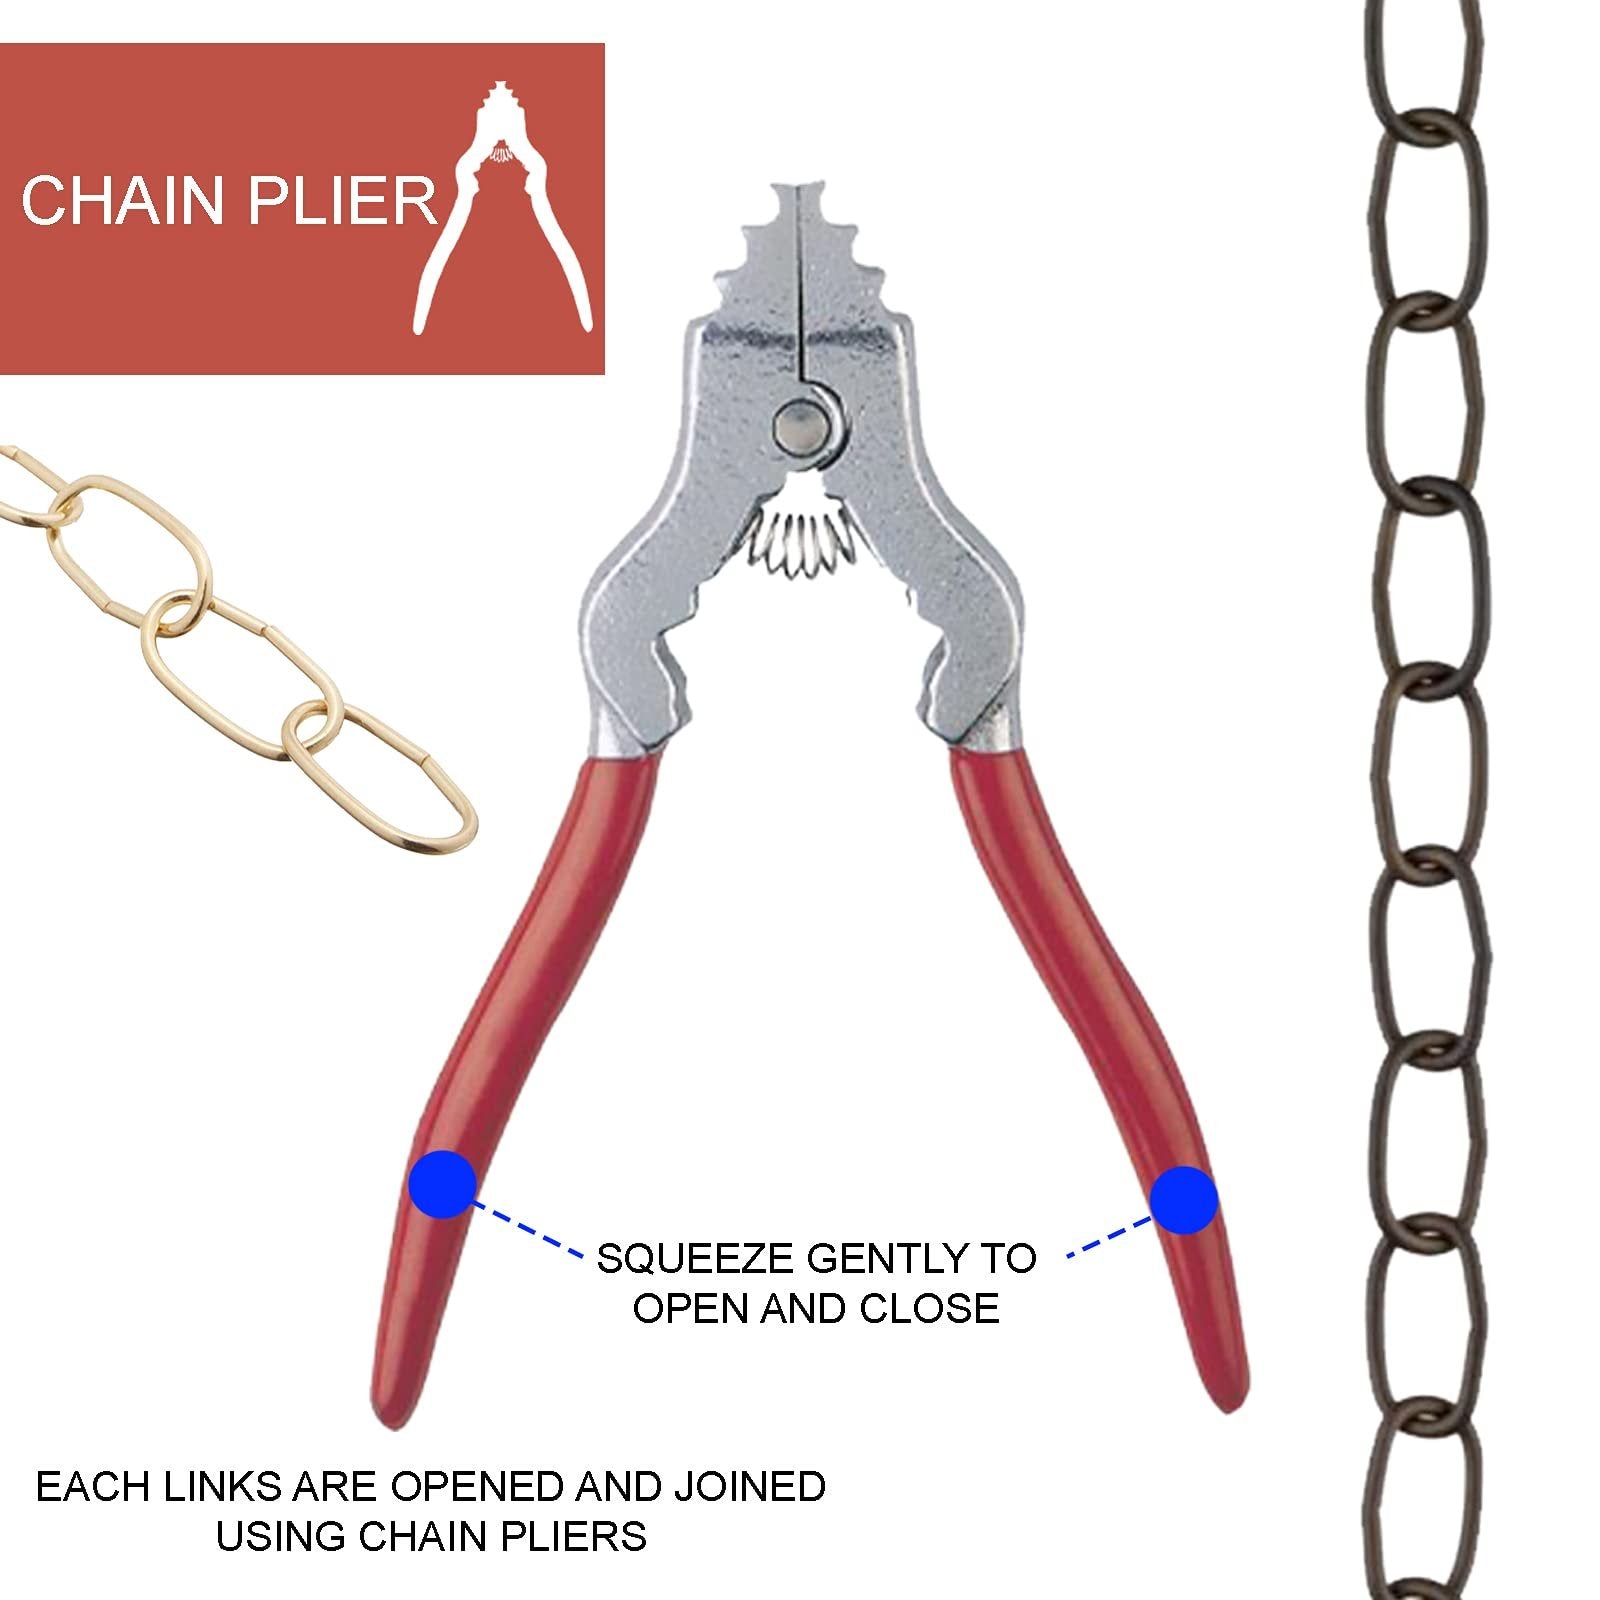 Ciata Chain Pliers, Fixture Spring loaded Chain Plier with Red Vinyl Grip in Silver Finish